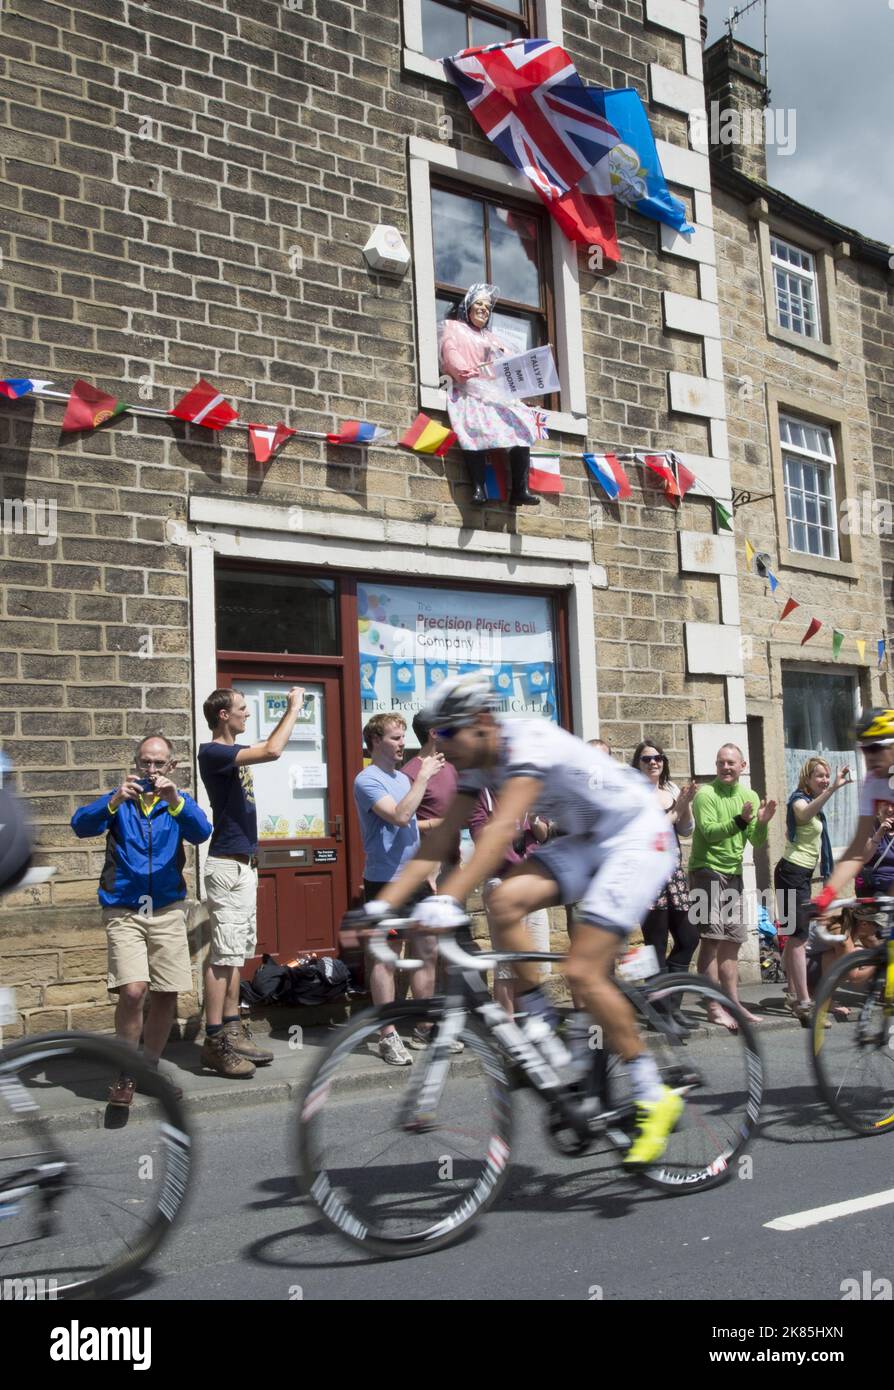 A doll looking like the Queen sits in a window as the peloton ride by with a sign saying Tallyhoo Mr Froome! Stock Photo